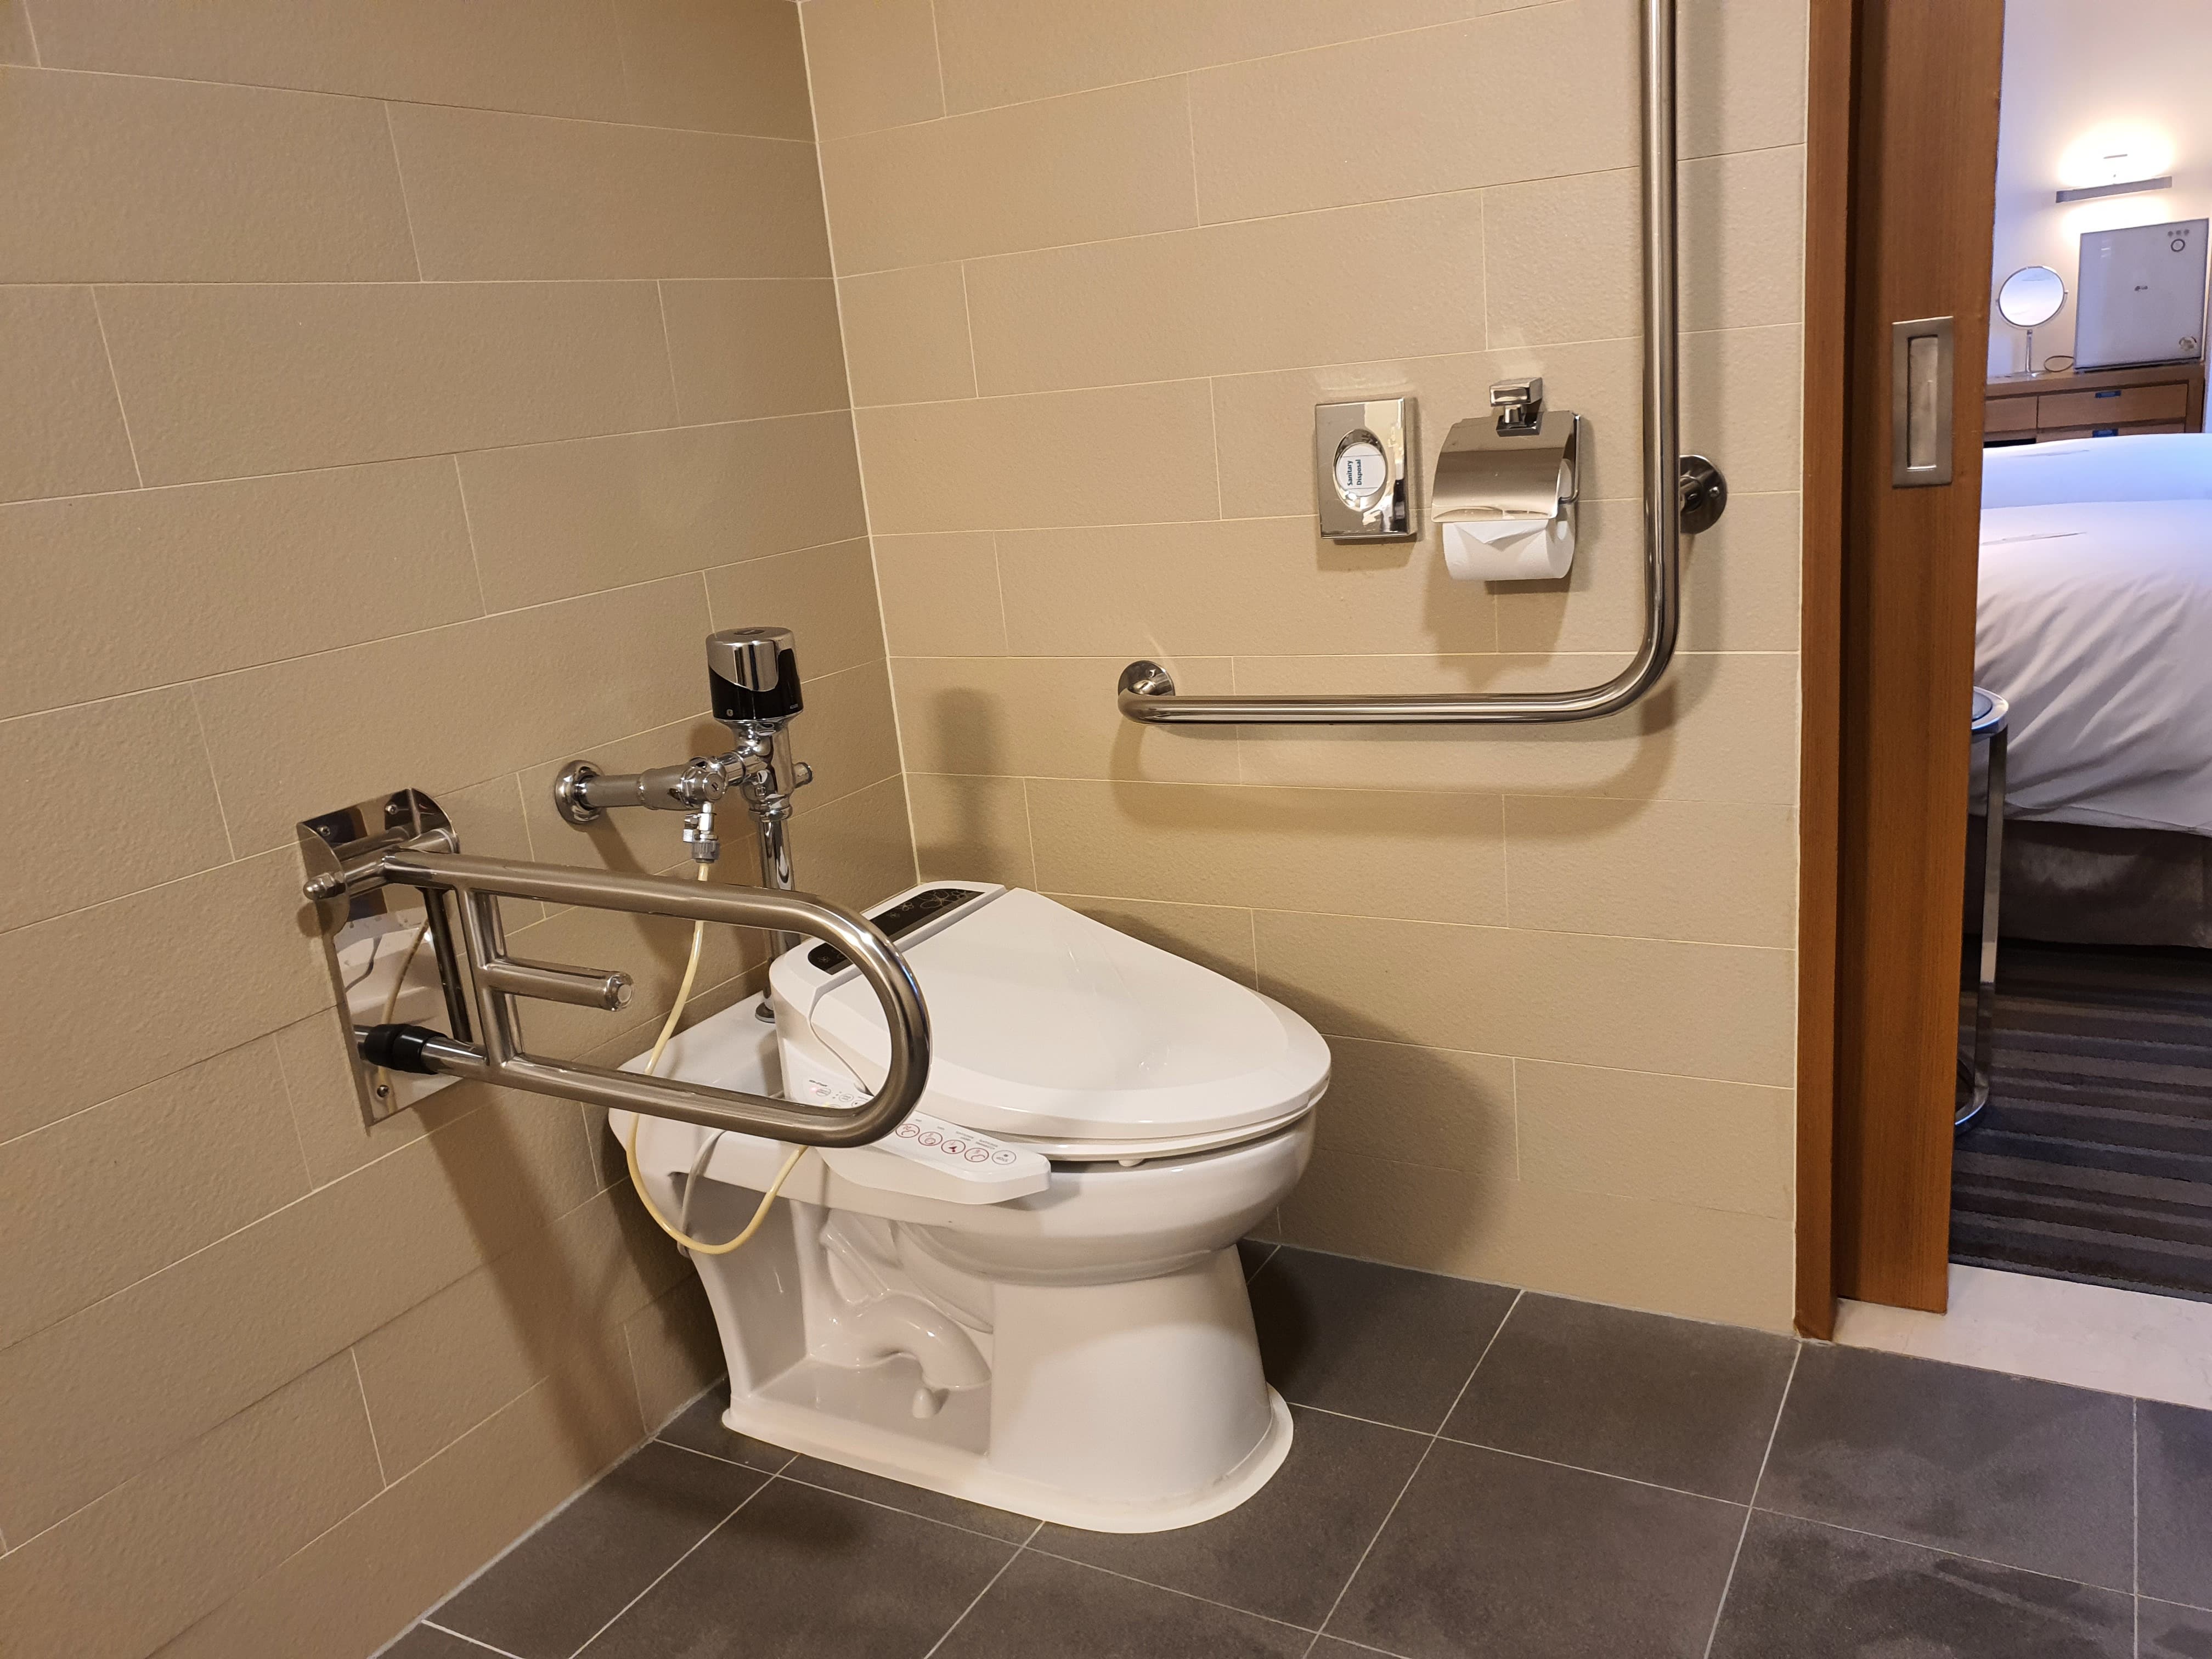 Accessible guestroom bathroom0 : Toilet equipped with grab bars